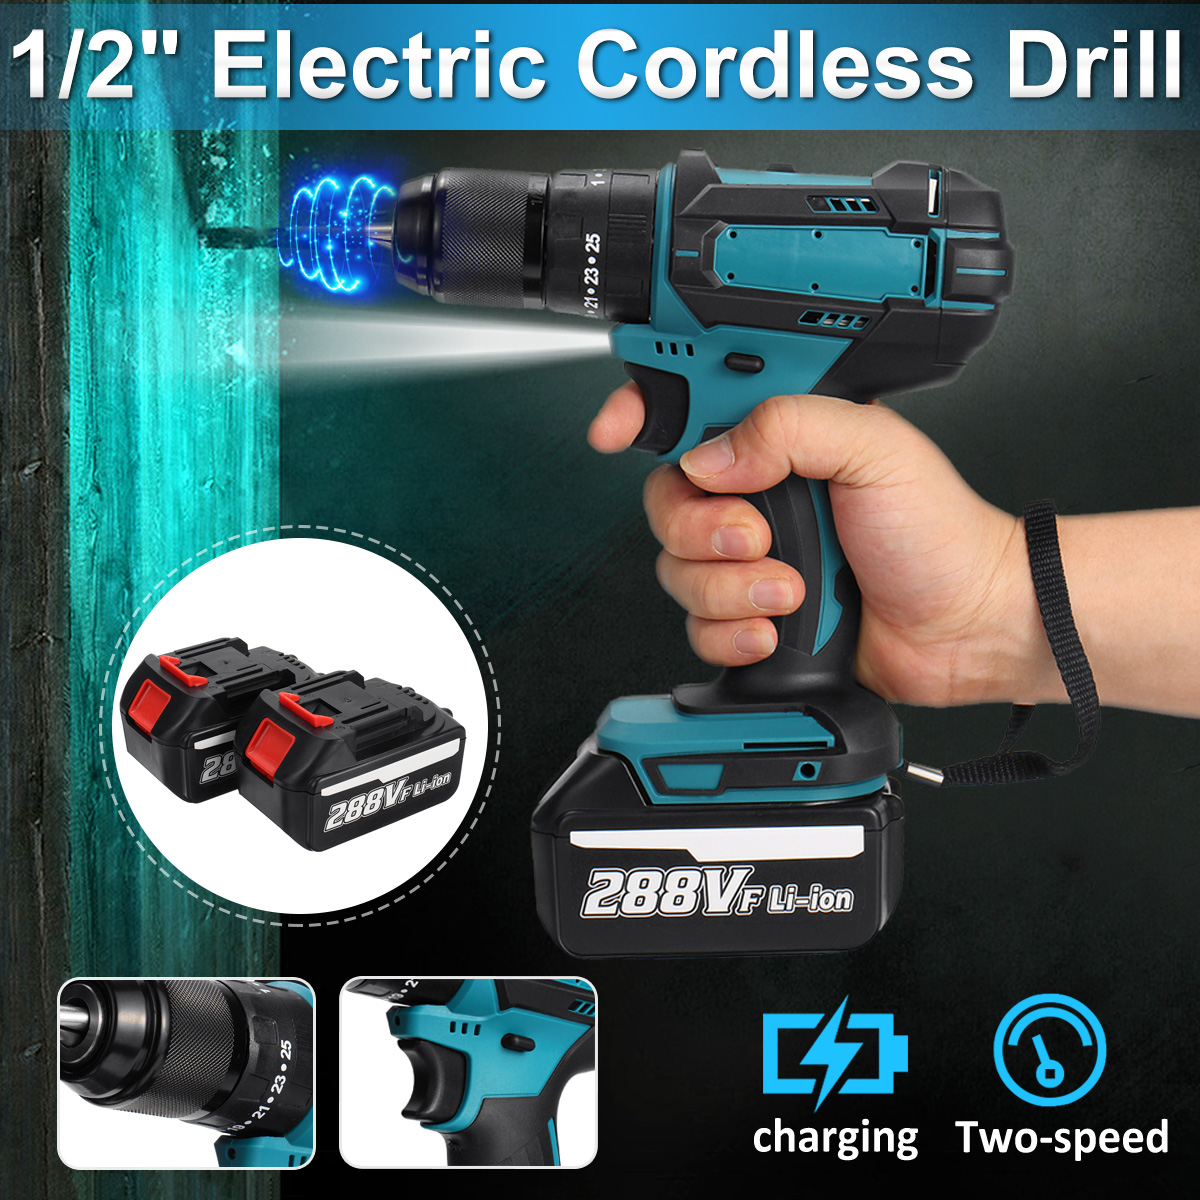 Wolike-13mm-800W-Cordless-Electirc-Impact-Drill-Driver-253-Torque-Electric-Drill-Screwdriver-1880979-3